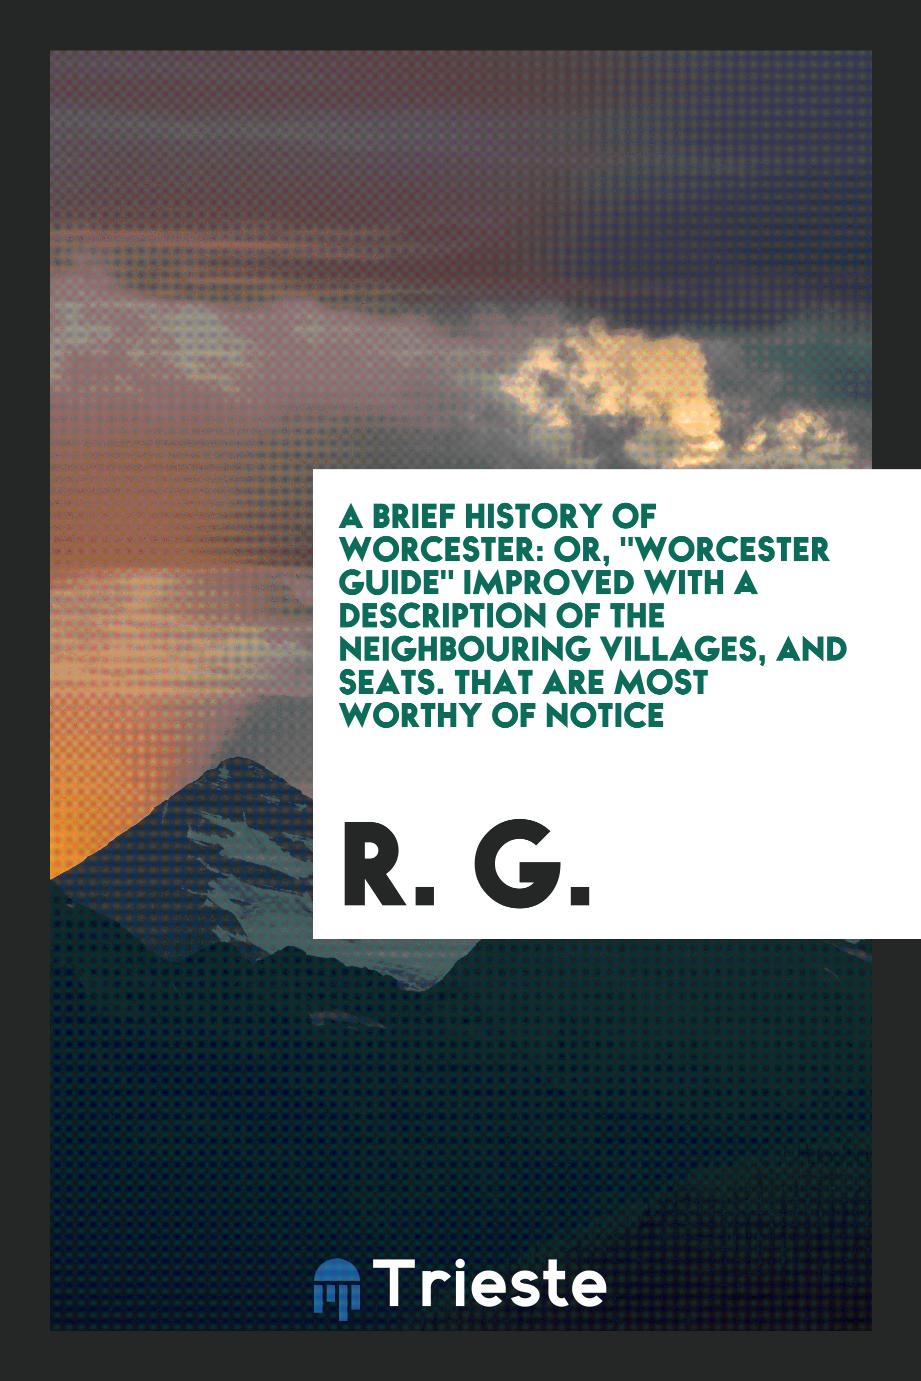 A brief history of Worcester: or, "Worcester guide" improved with a description of the neighbouring villages, and seats. That are most worthy of Notice